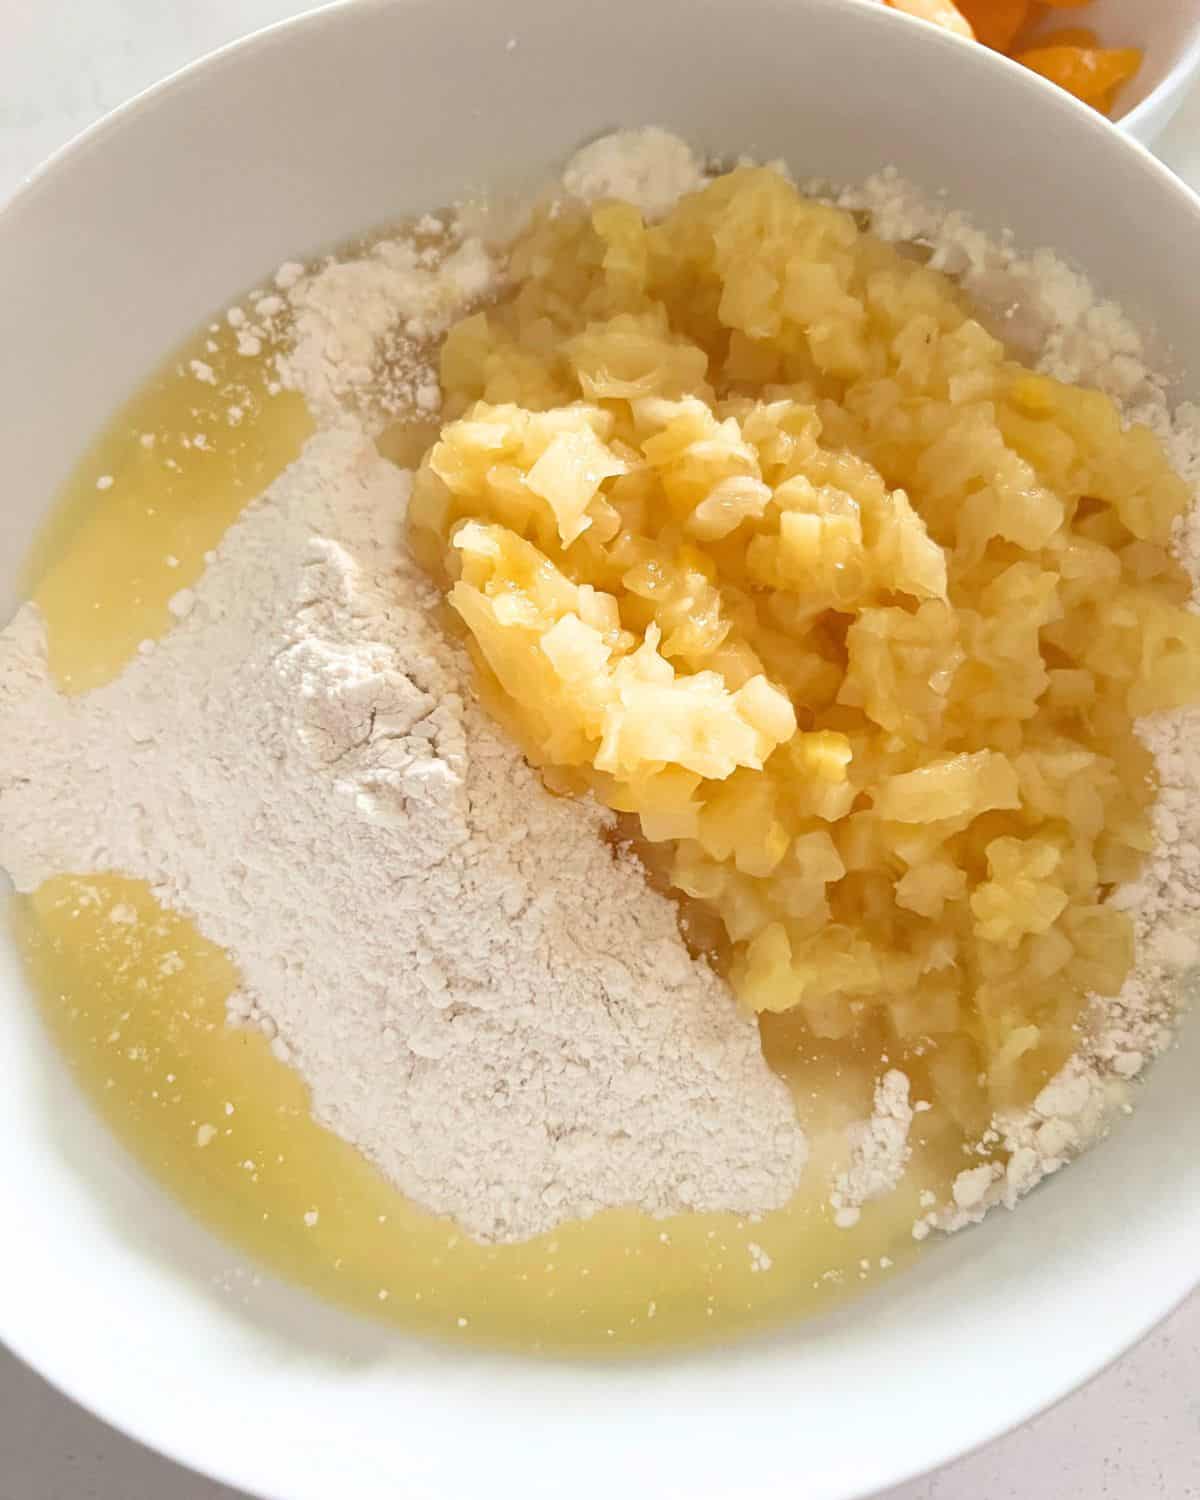 Dry cake mix and pineapple in a bowl. 